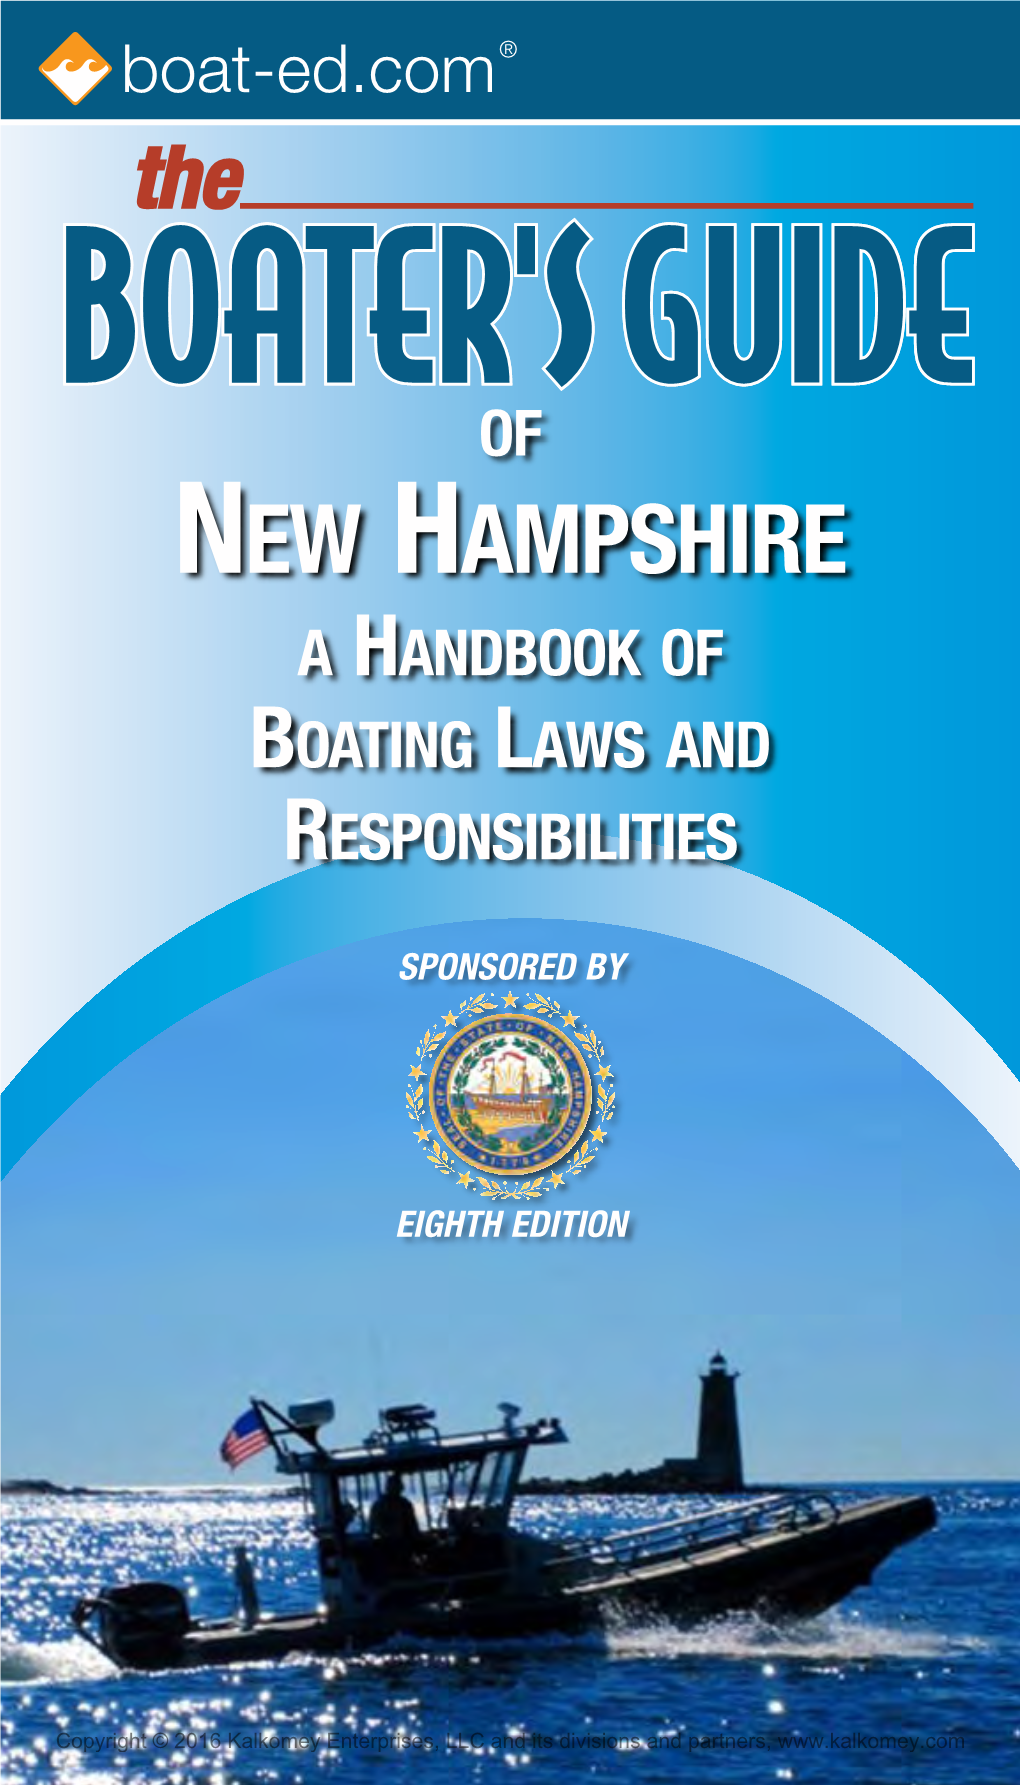 New Hampshire a Handbook of Boating Laws and Responsibilities